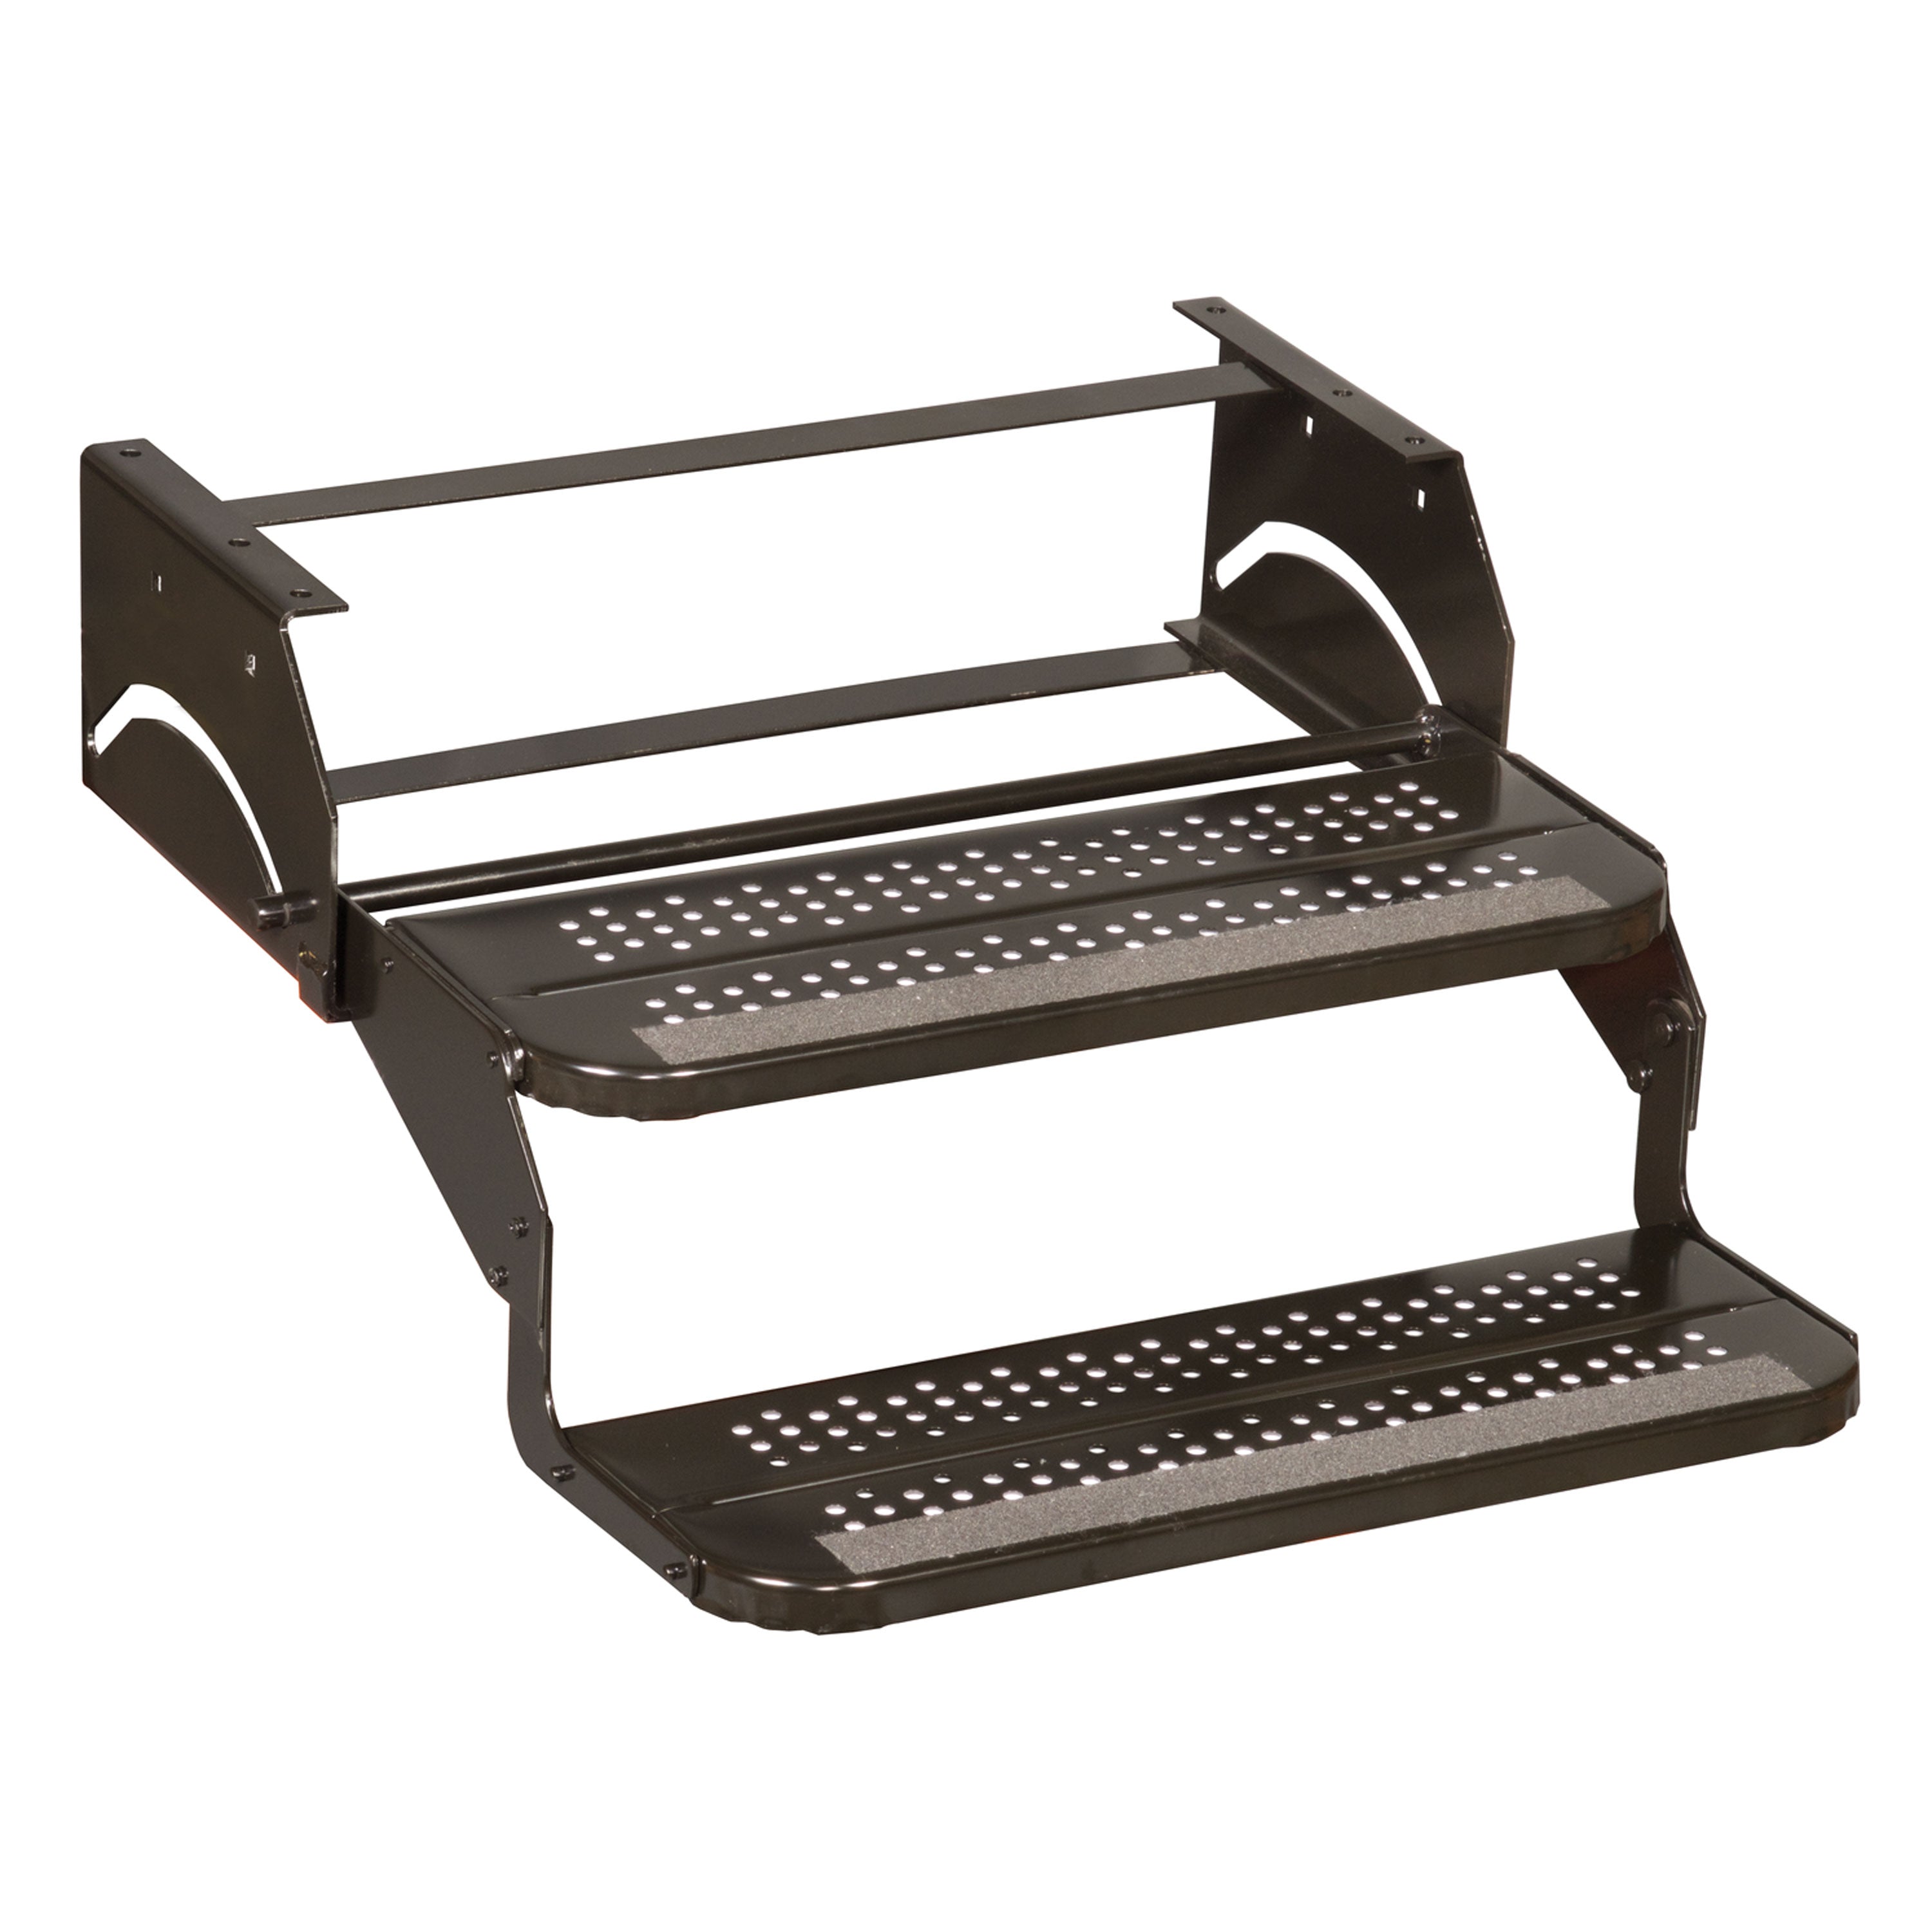 Elkhart Tool & Die 920-7 Standard Double Camper Step with 20" Wide Tread - 11.75" Drop and 7" Risers